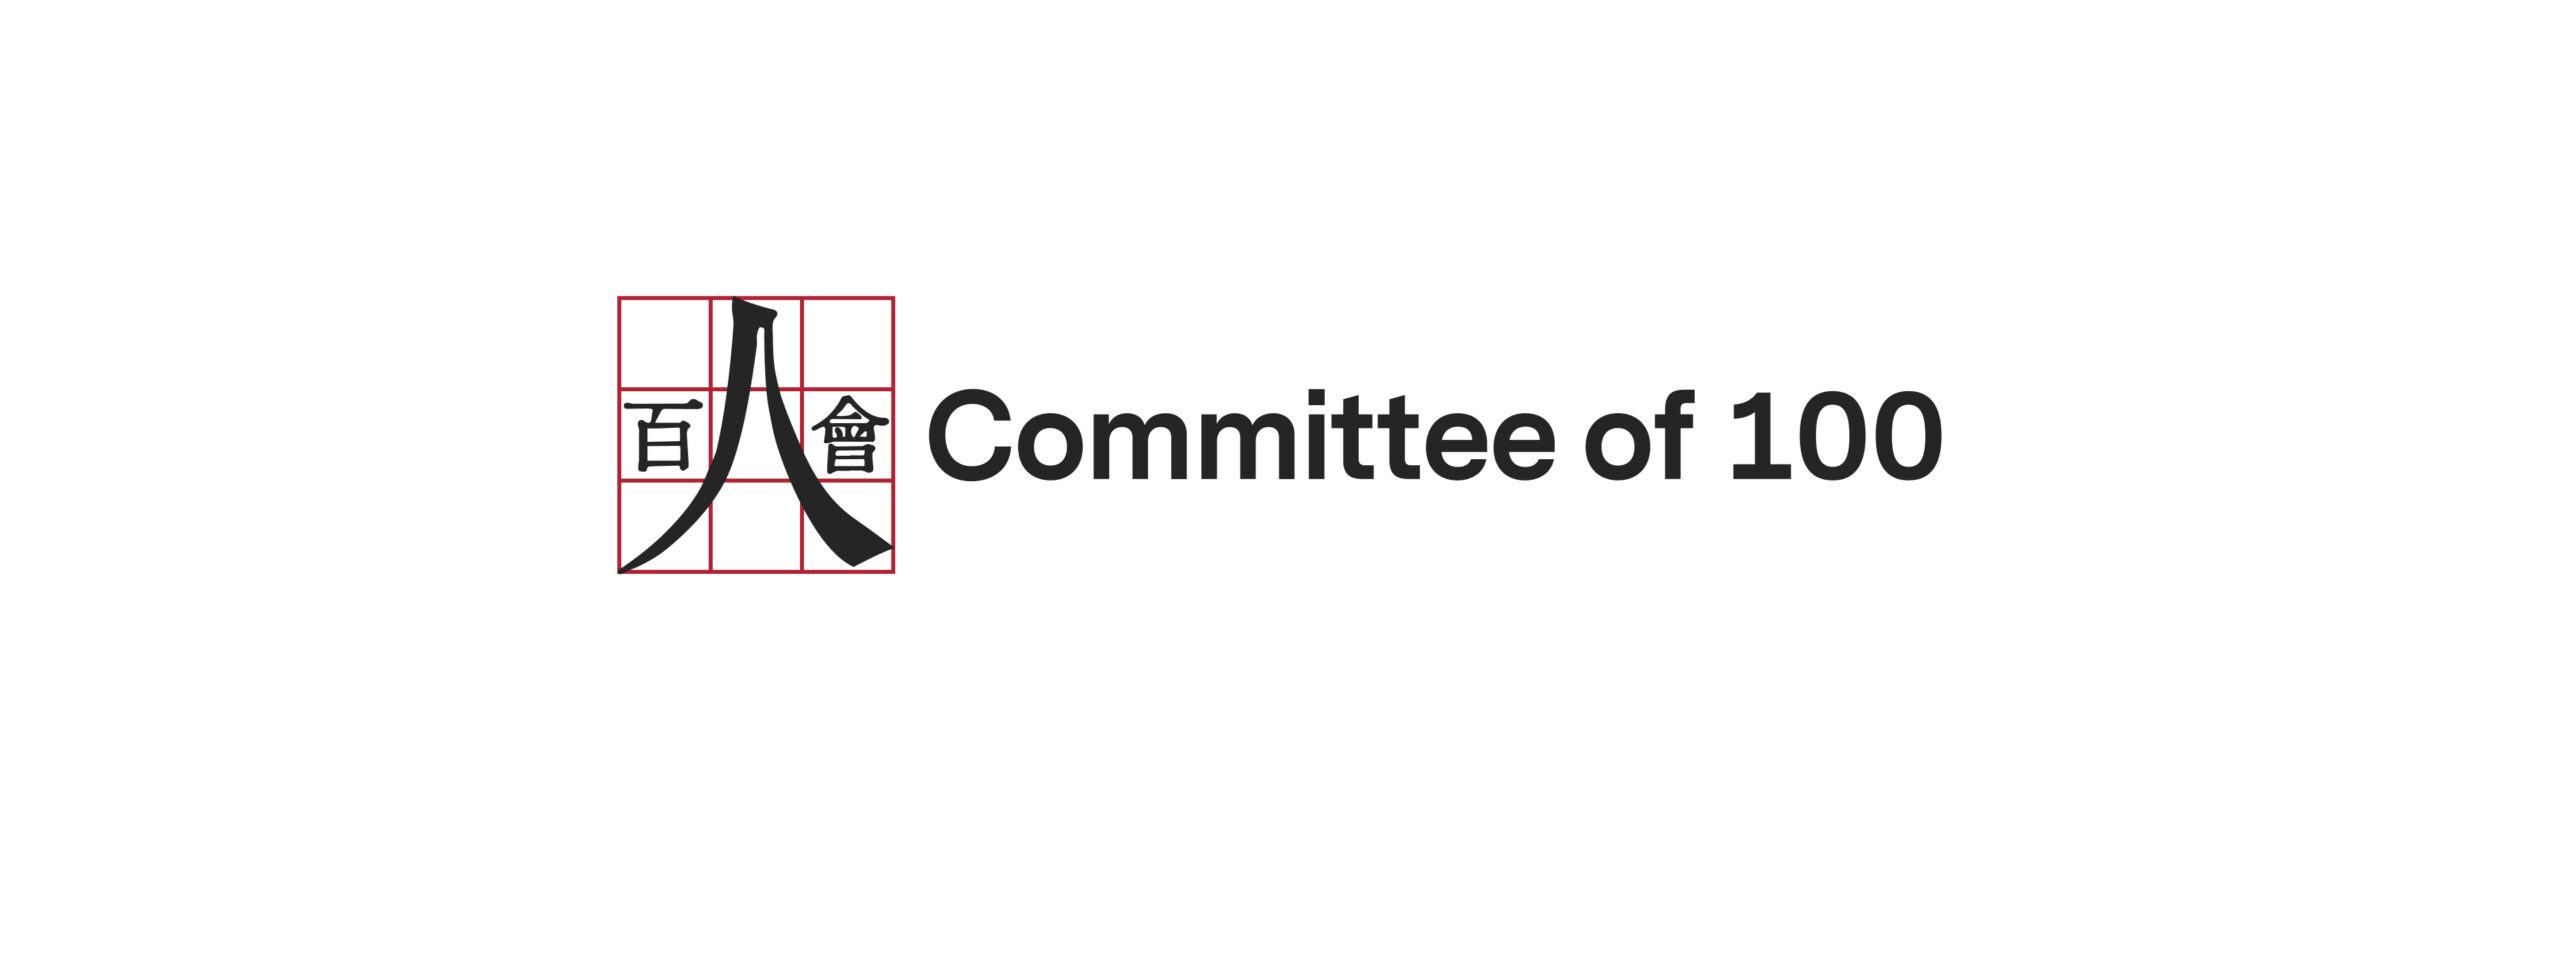 Committee of 100 Mourns the Sudden Passing of Chien Chung “Didi” Pei